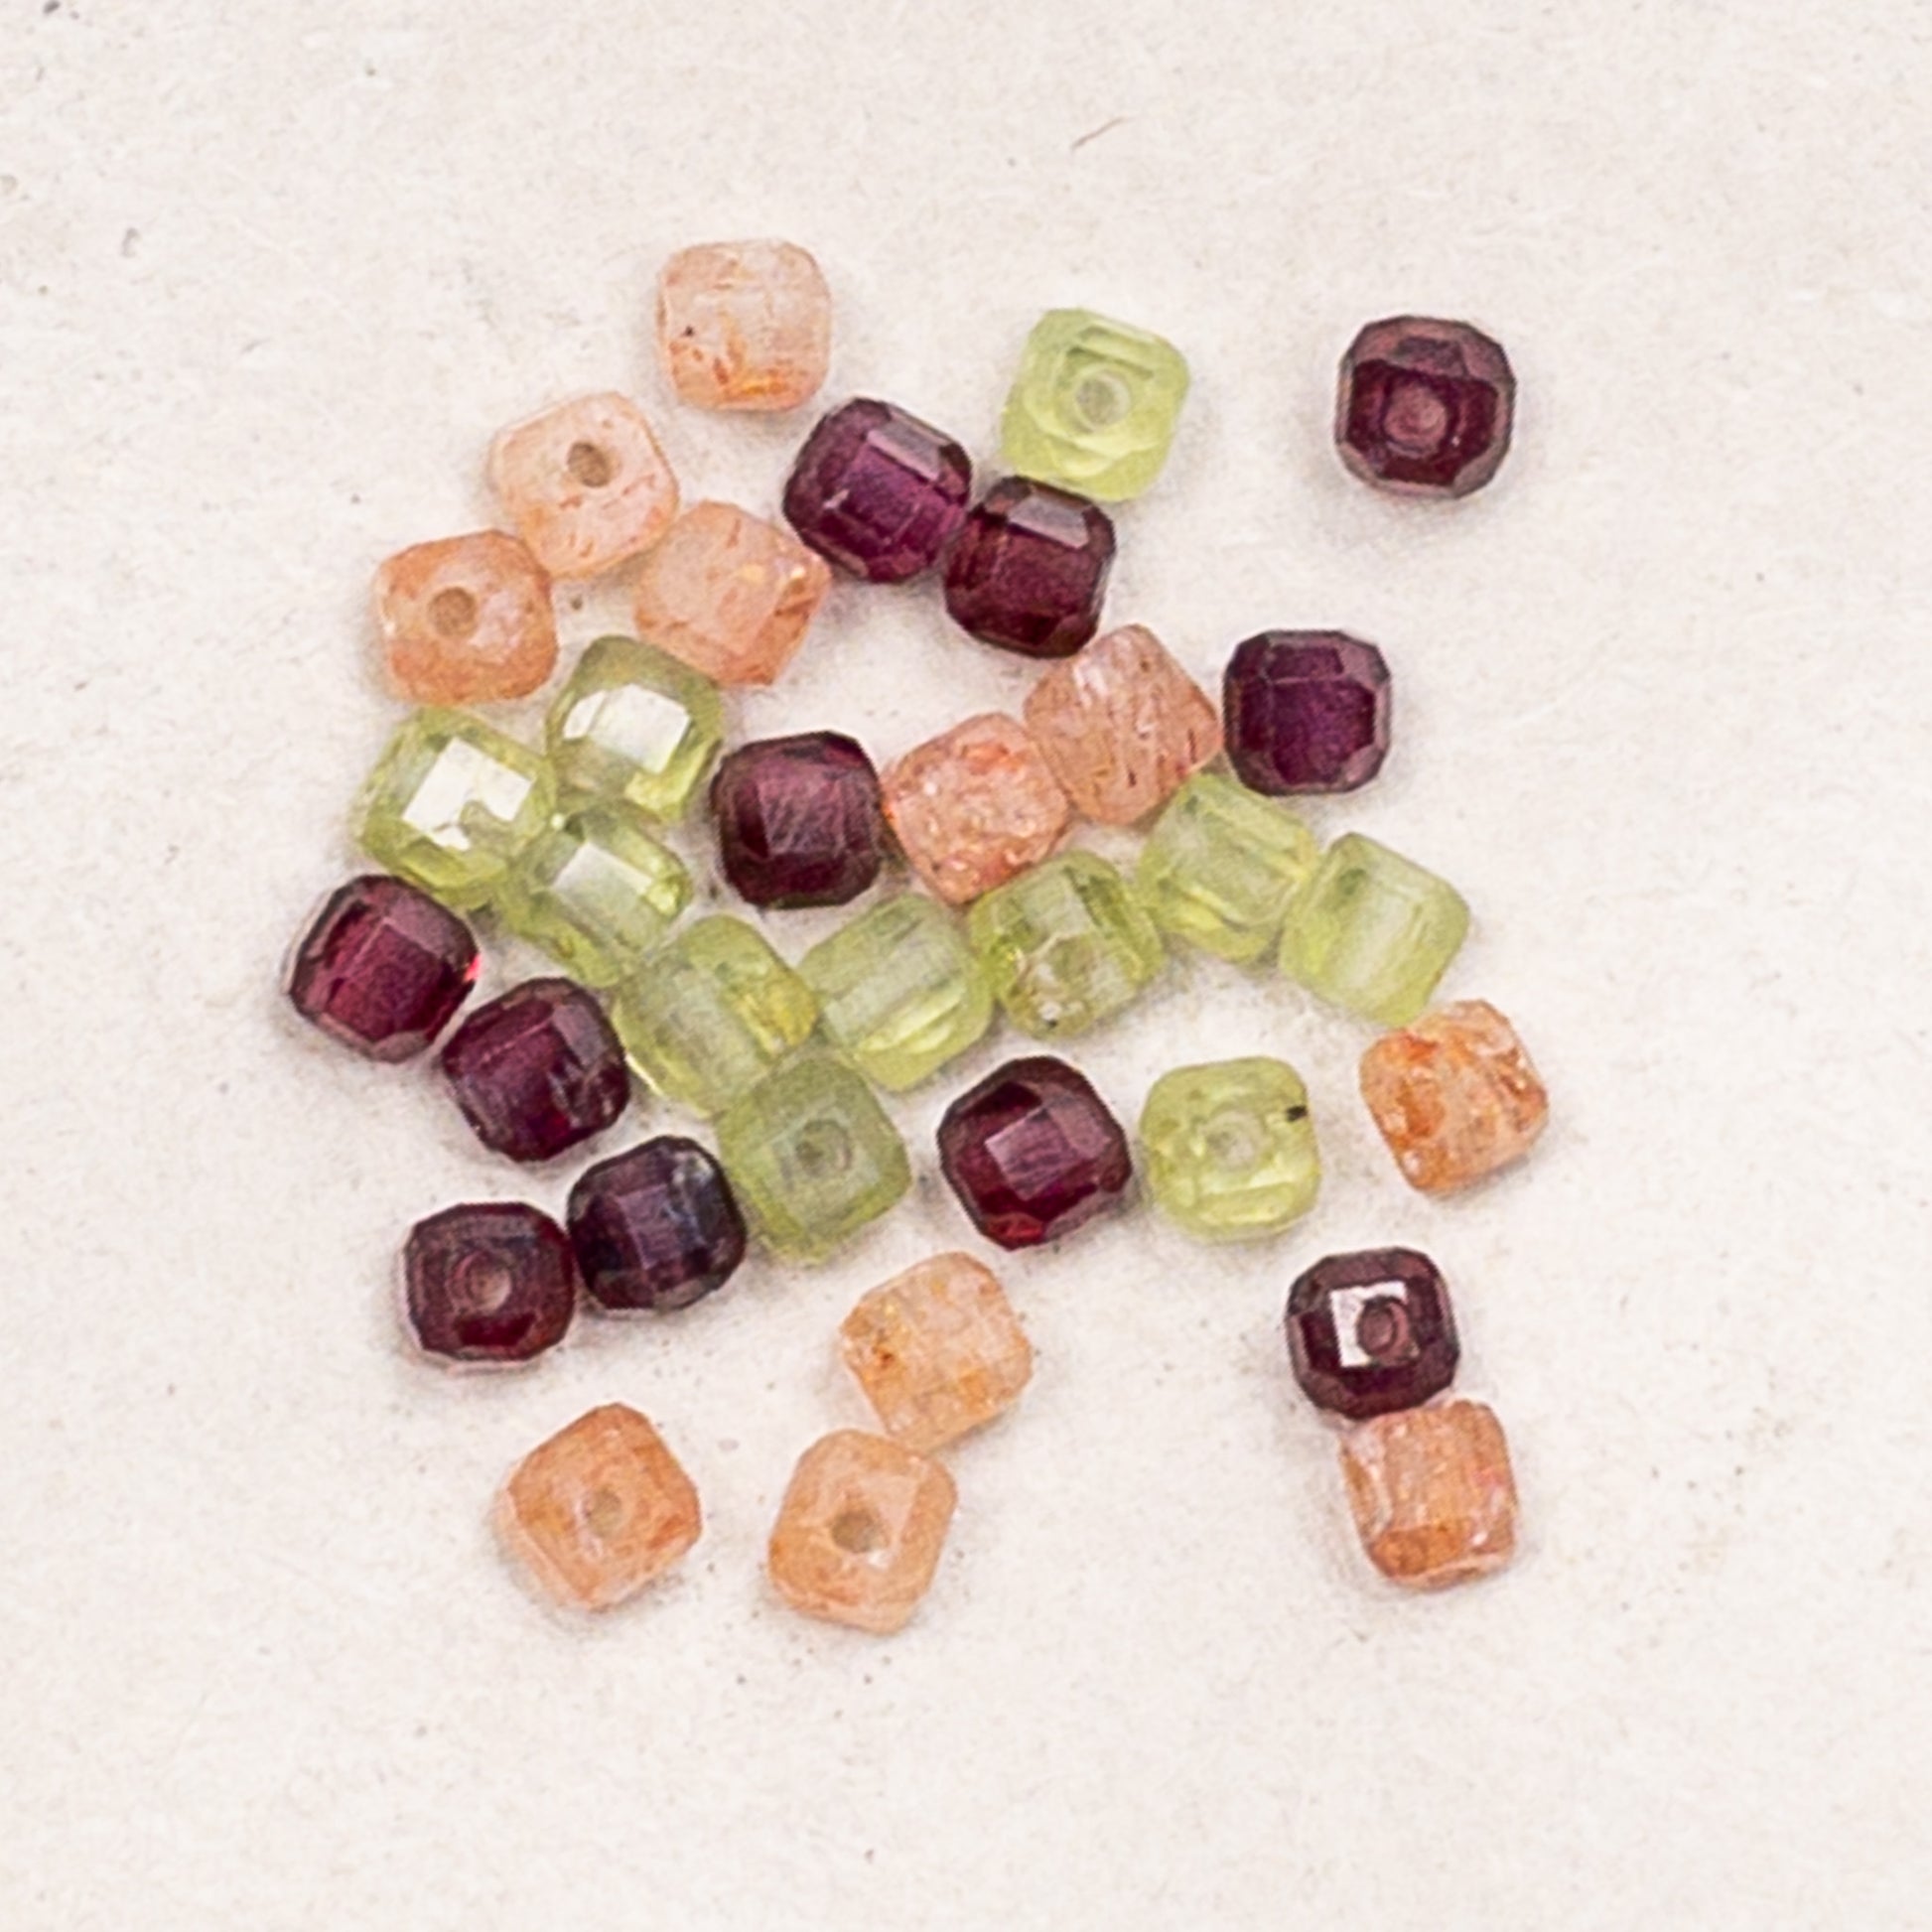 Ginger Bouquet Mixed Gemstone 2.5mm Faceted Cube Bead Mix - 33 pcs.-The Bead Gallery Honolulu